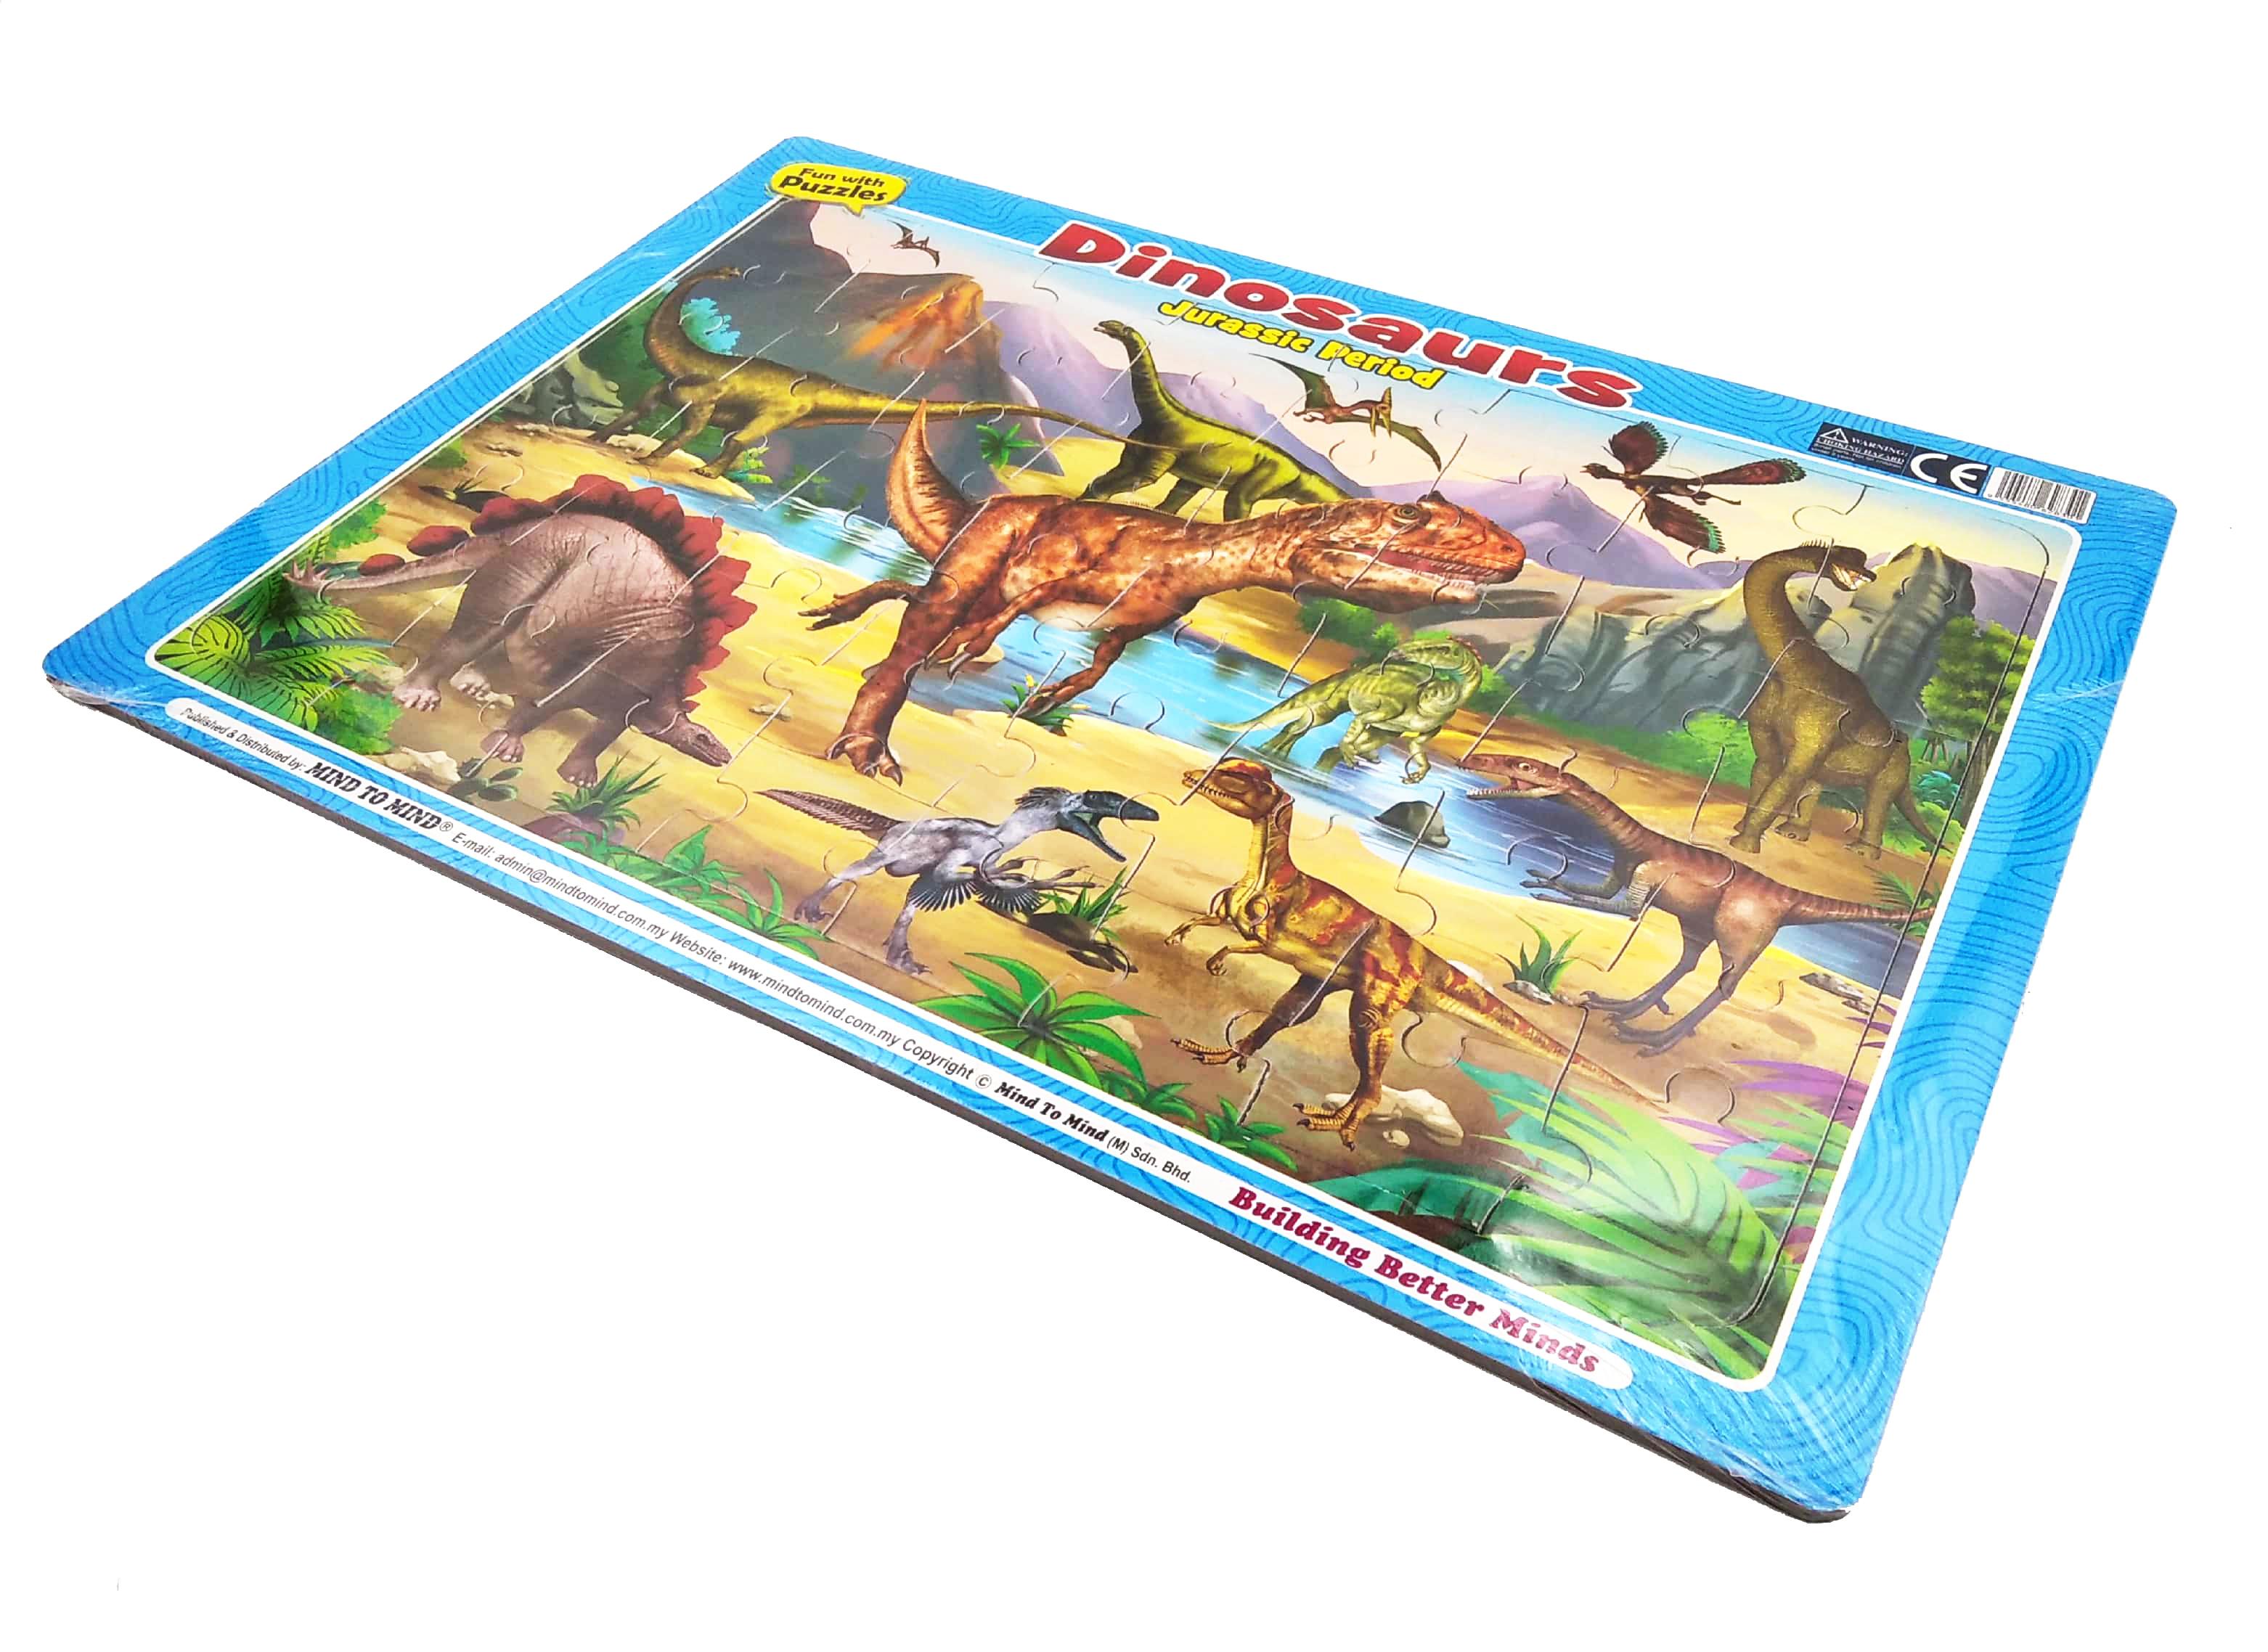 Fun With Puzzles: Dinosaurs Jurassic Period